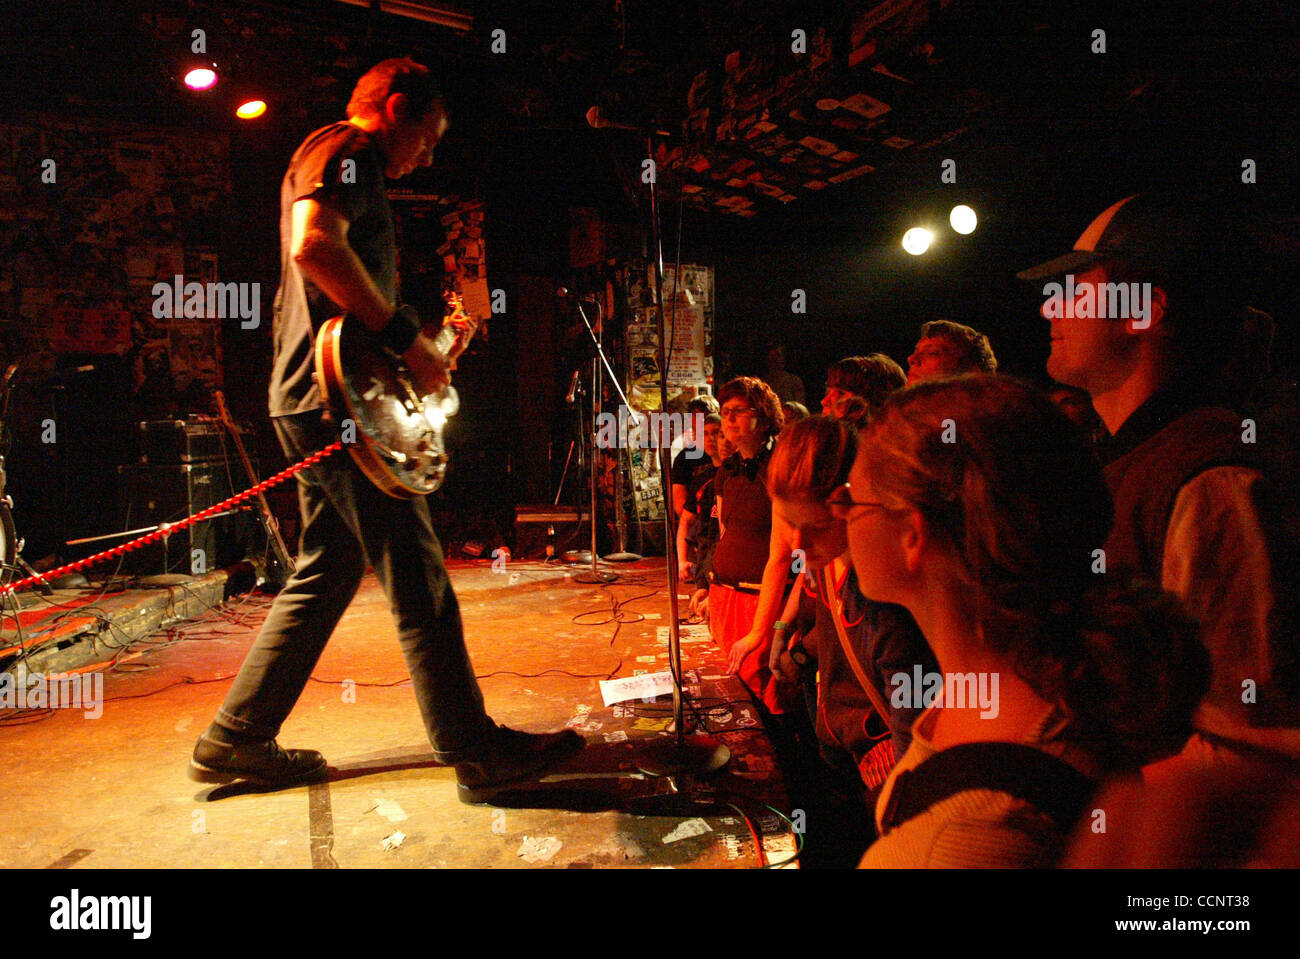 Oct 24, 2003; Manhatten, NY, USA; TED LEO of the 'Ted Leo Band' preforms at CBGB's on the Bowery in Manhattan for the CMJ music festival. Ted Leo, guitar and vocals, Dave Lerner, bass, Chris Wilson, drums. Stock Photo